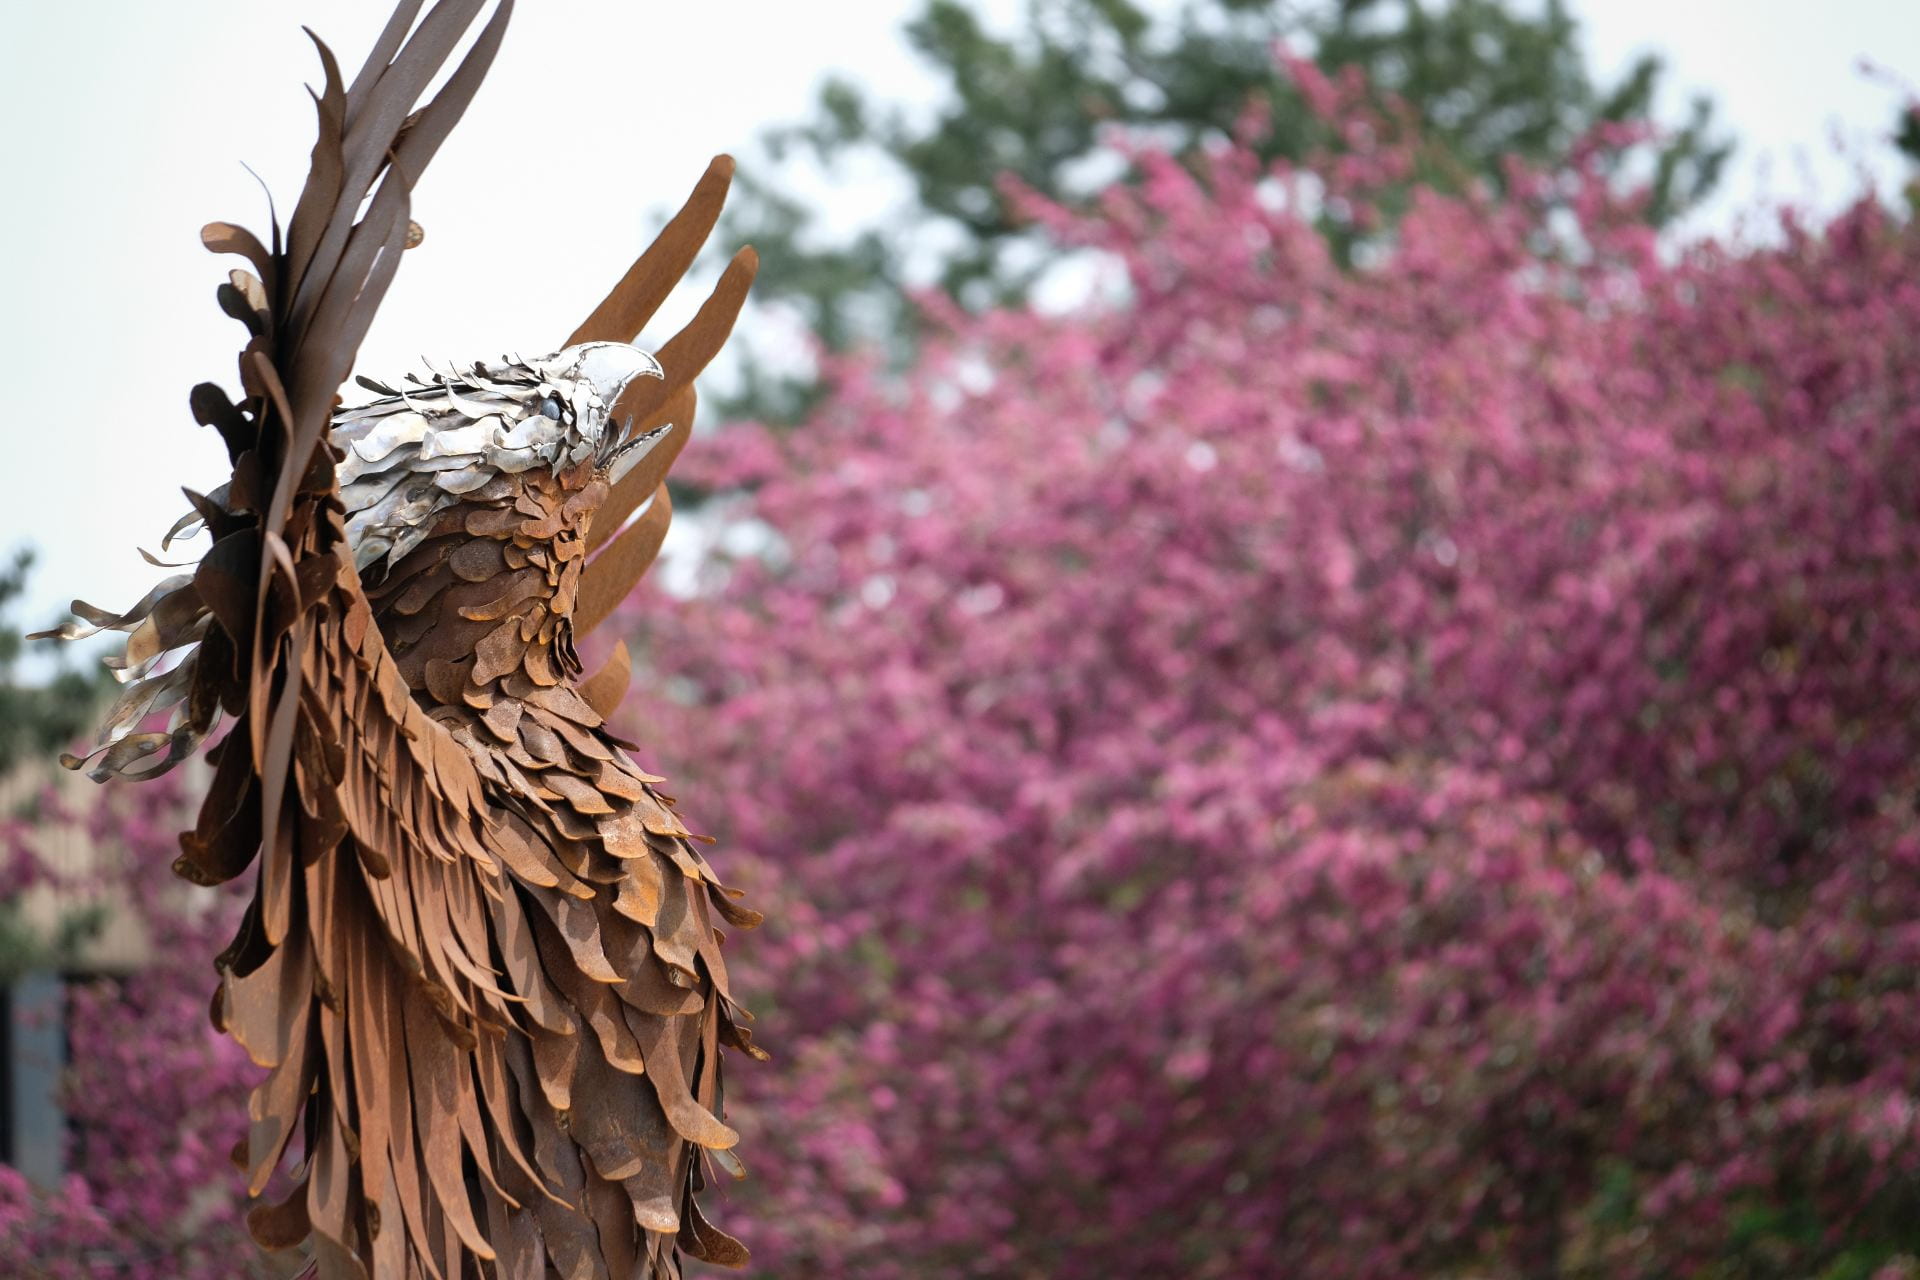 Phoenix Rising sculpture with trees in blossom in the background